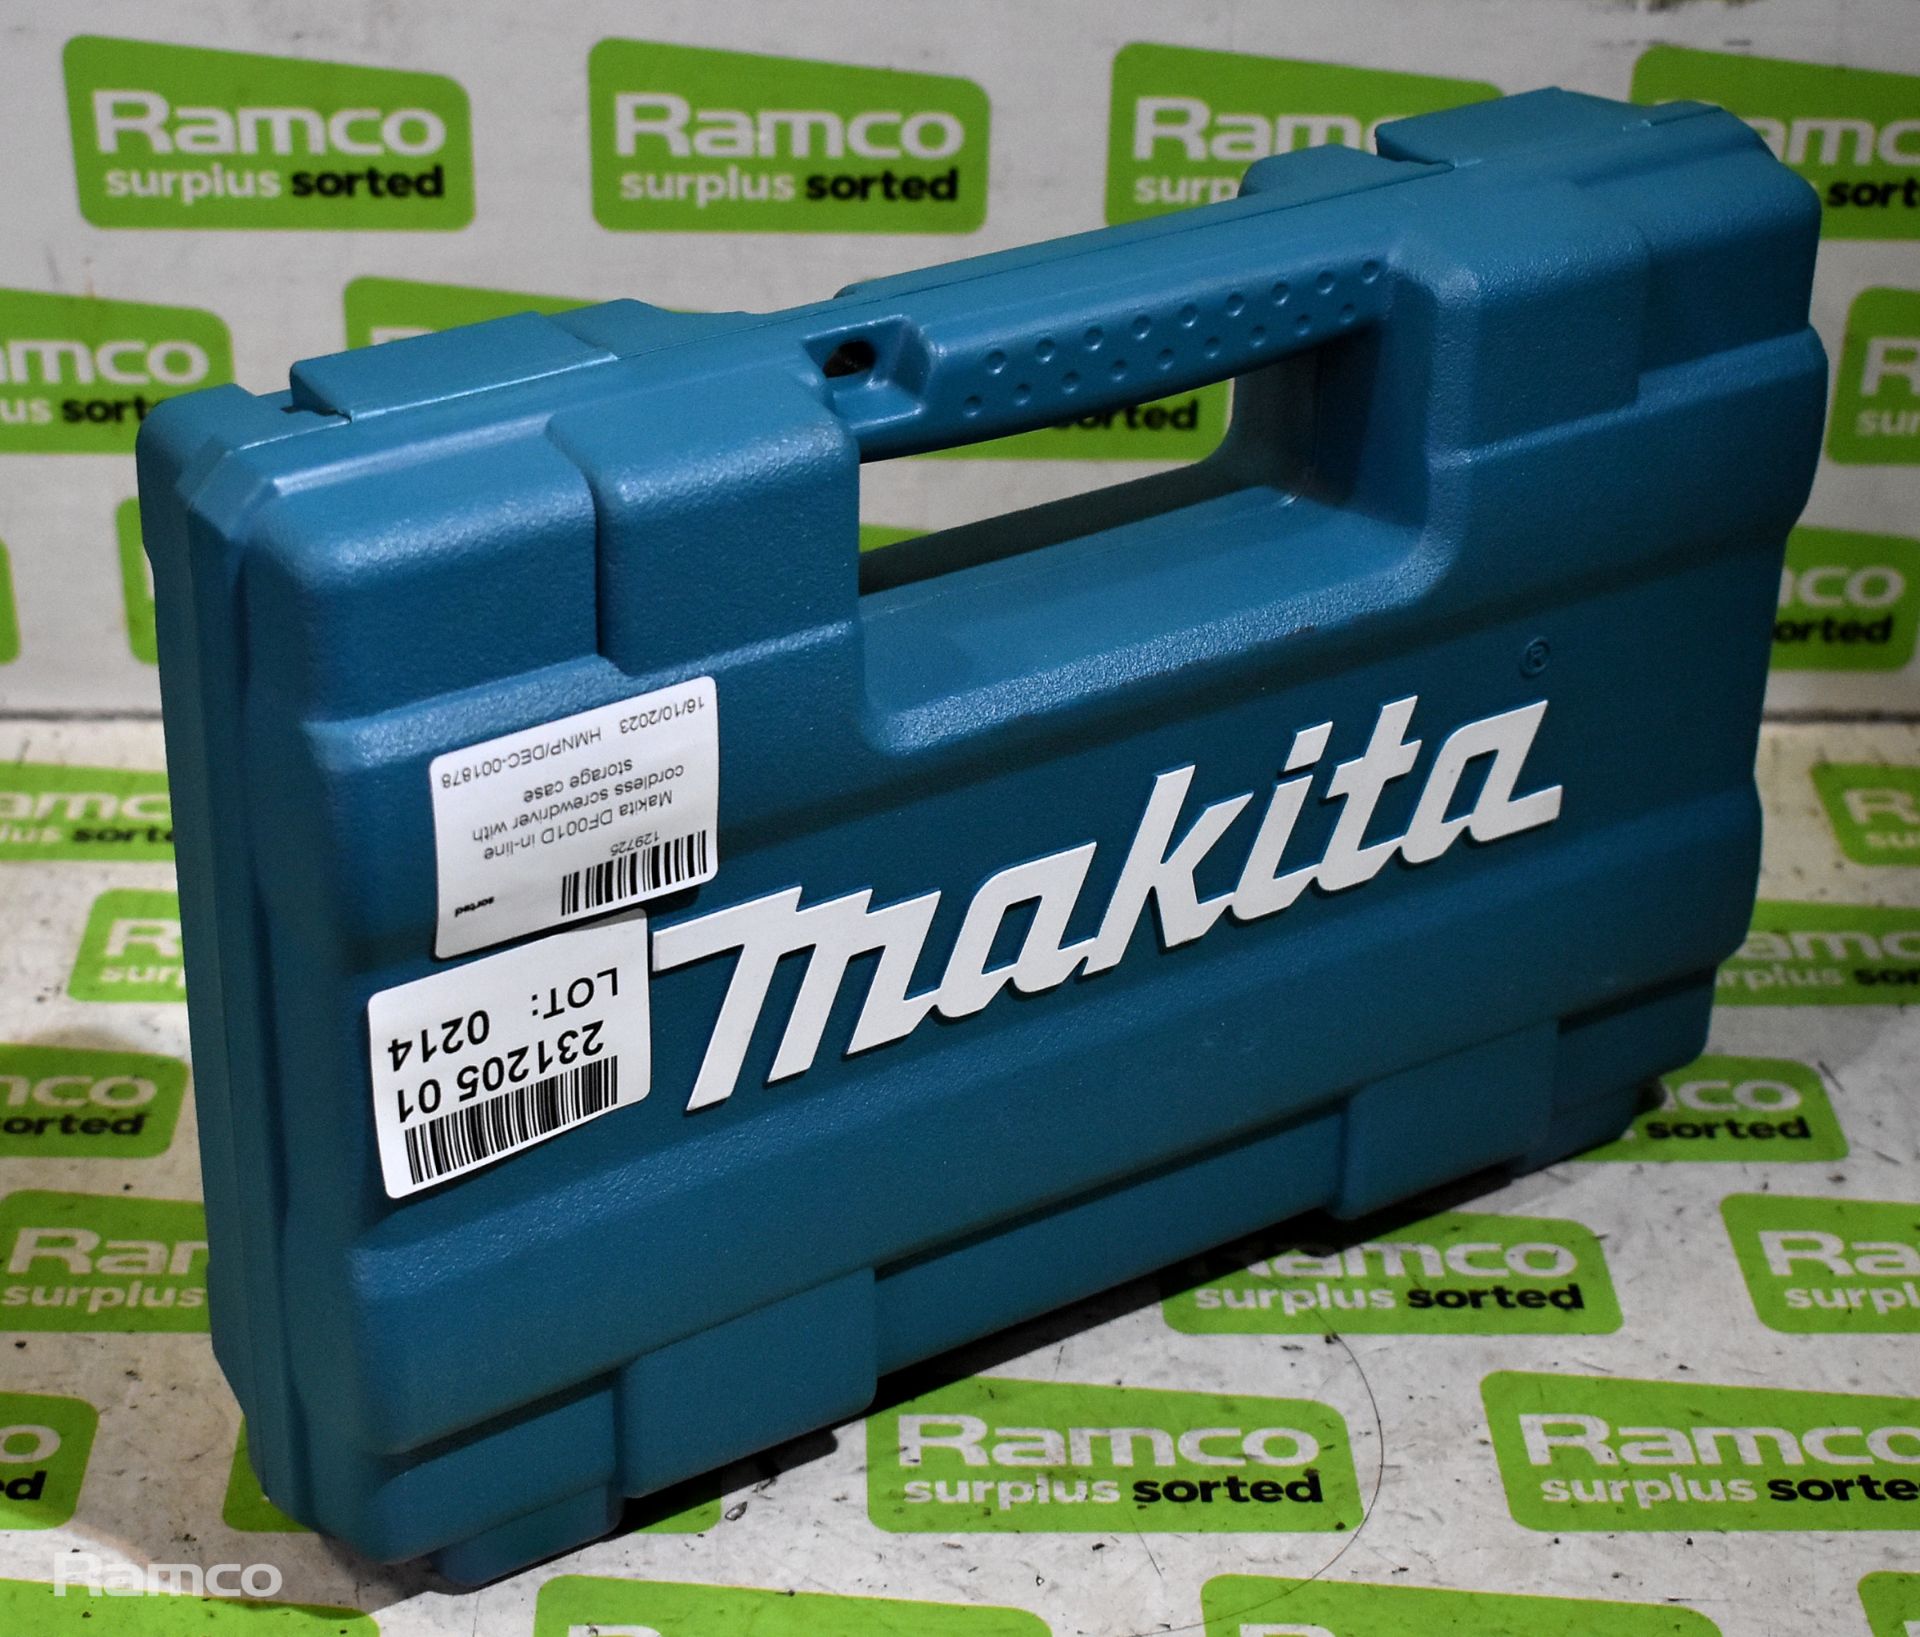 Makita DF001D in-line cordless screwdriver with storage case - Image 5 of 5